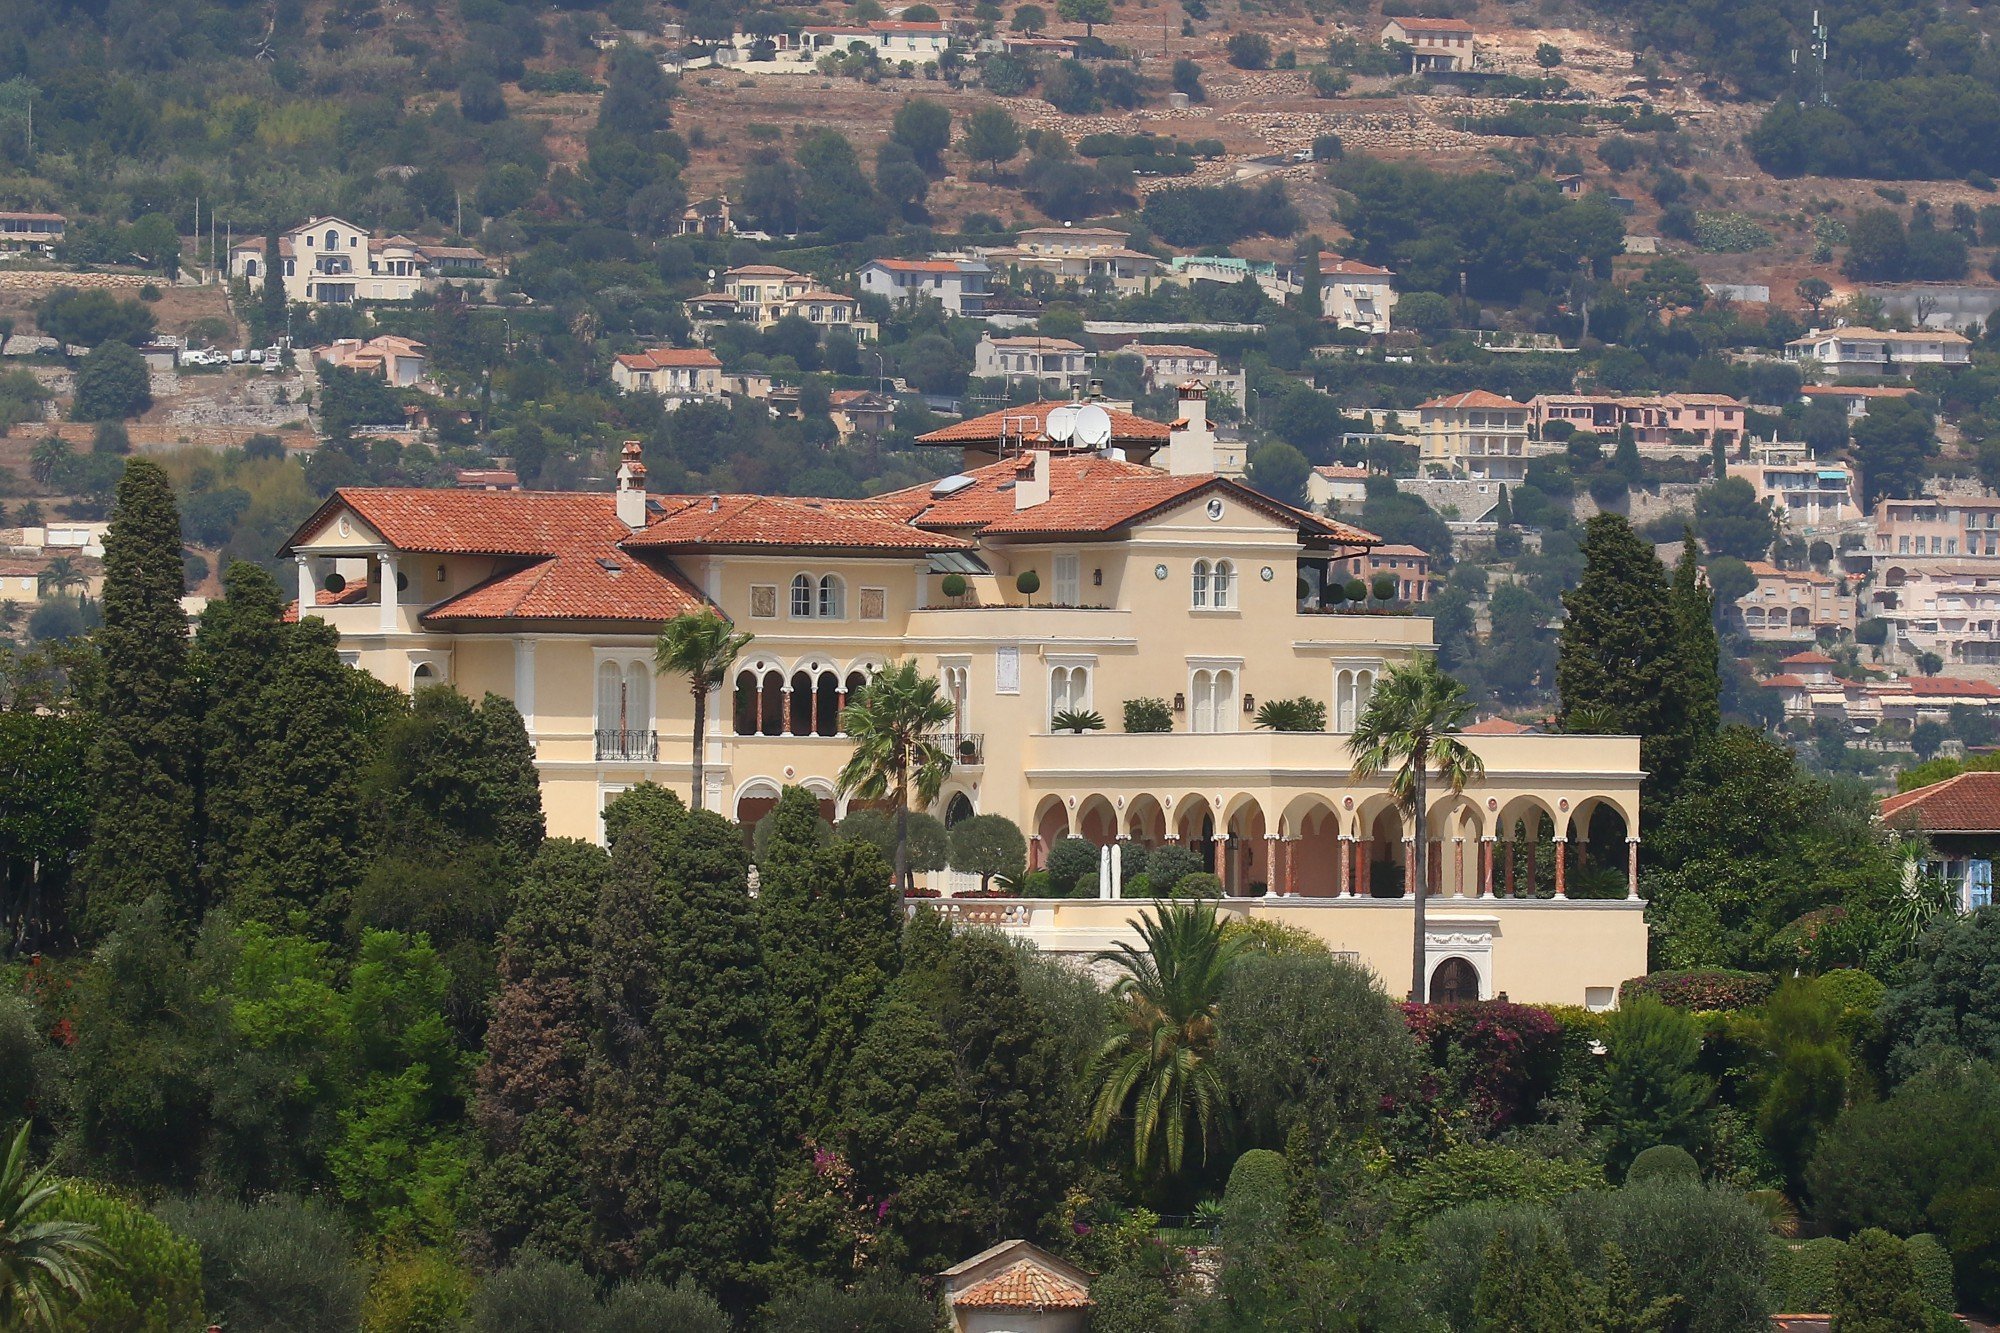 The most expensive house is situated in France and is sold for €1 billion